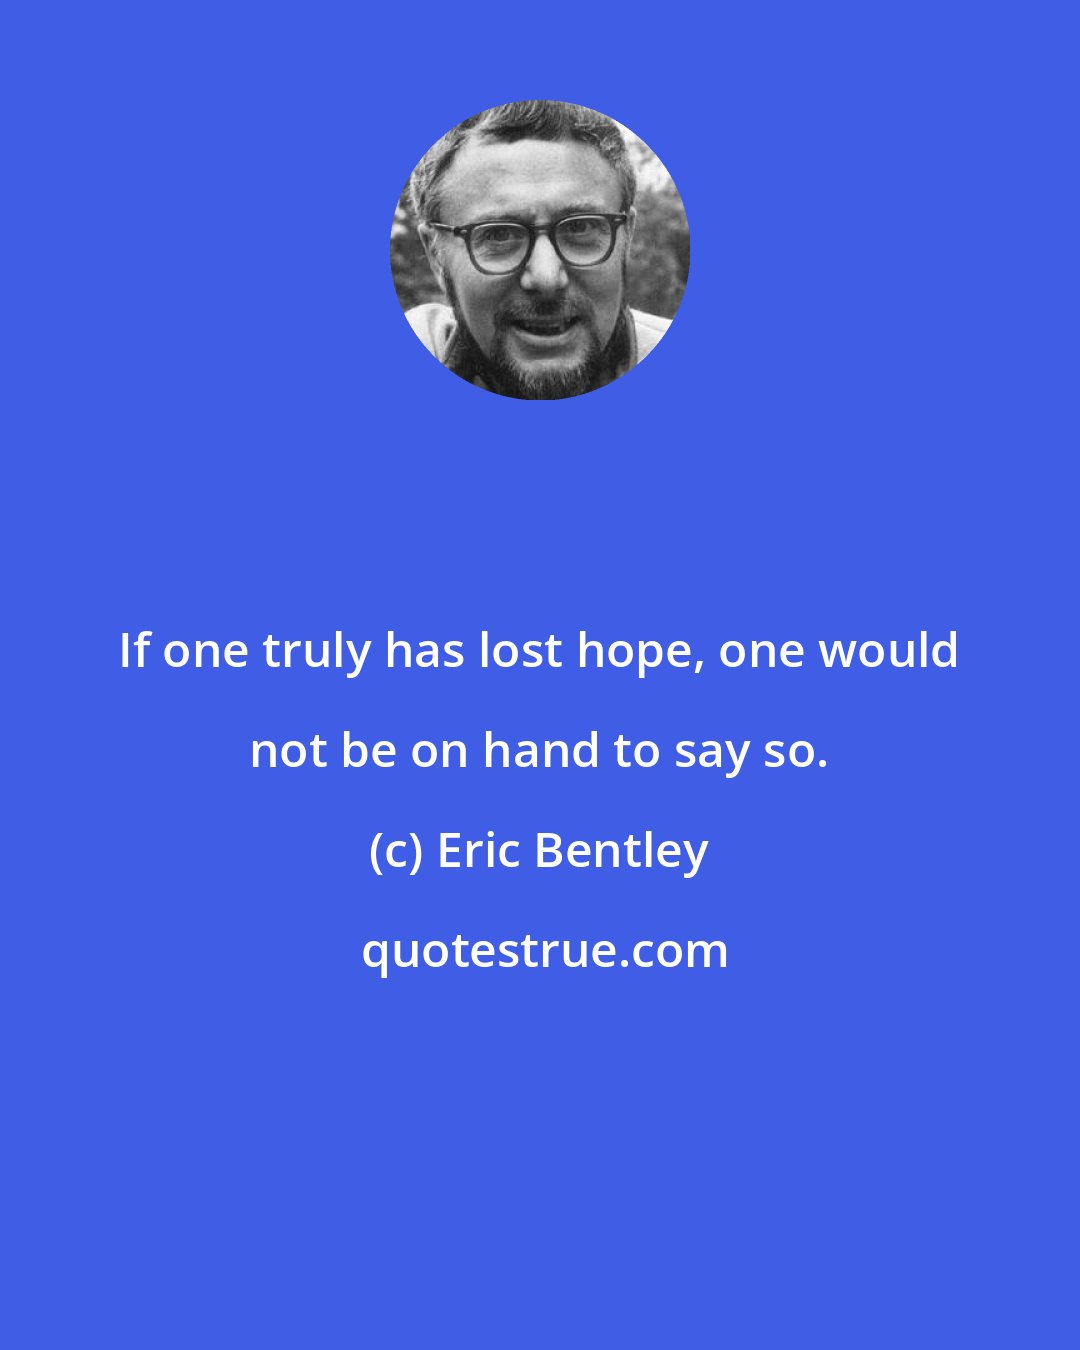 Eric Bentley: If one truly has lost hope, one would not be on hand to say so.